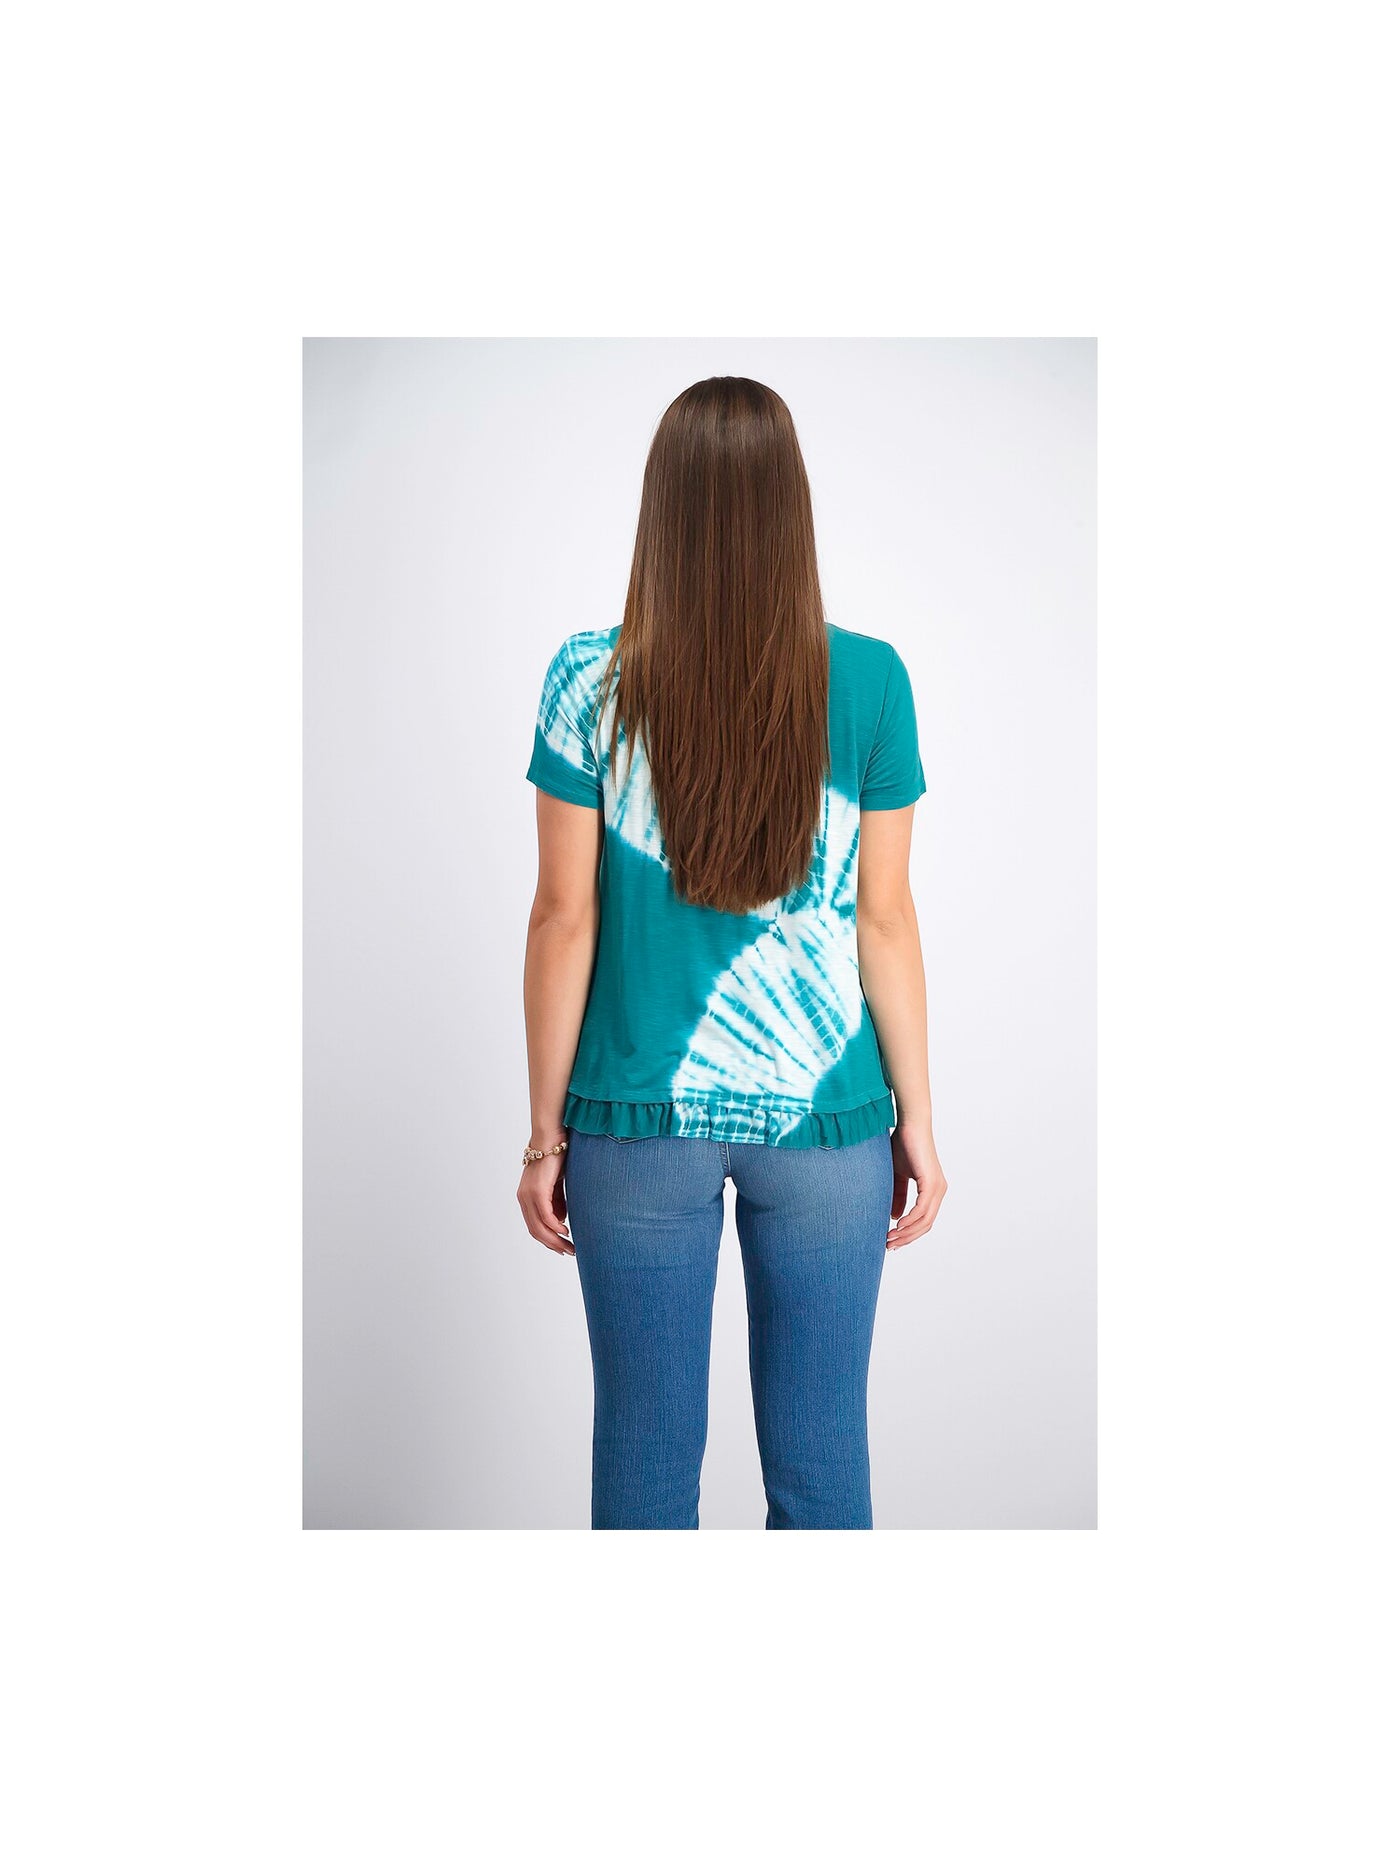 STYLE & COMPANY Womens Teal Tie Dye Short Sleeve T-Shirt Size: XS